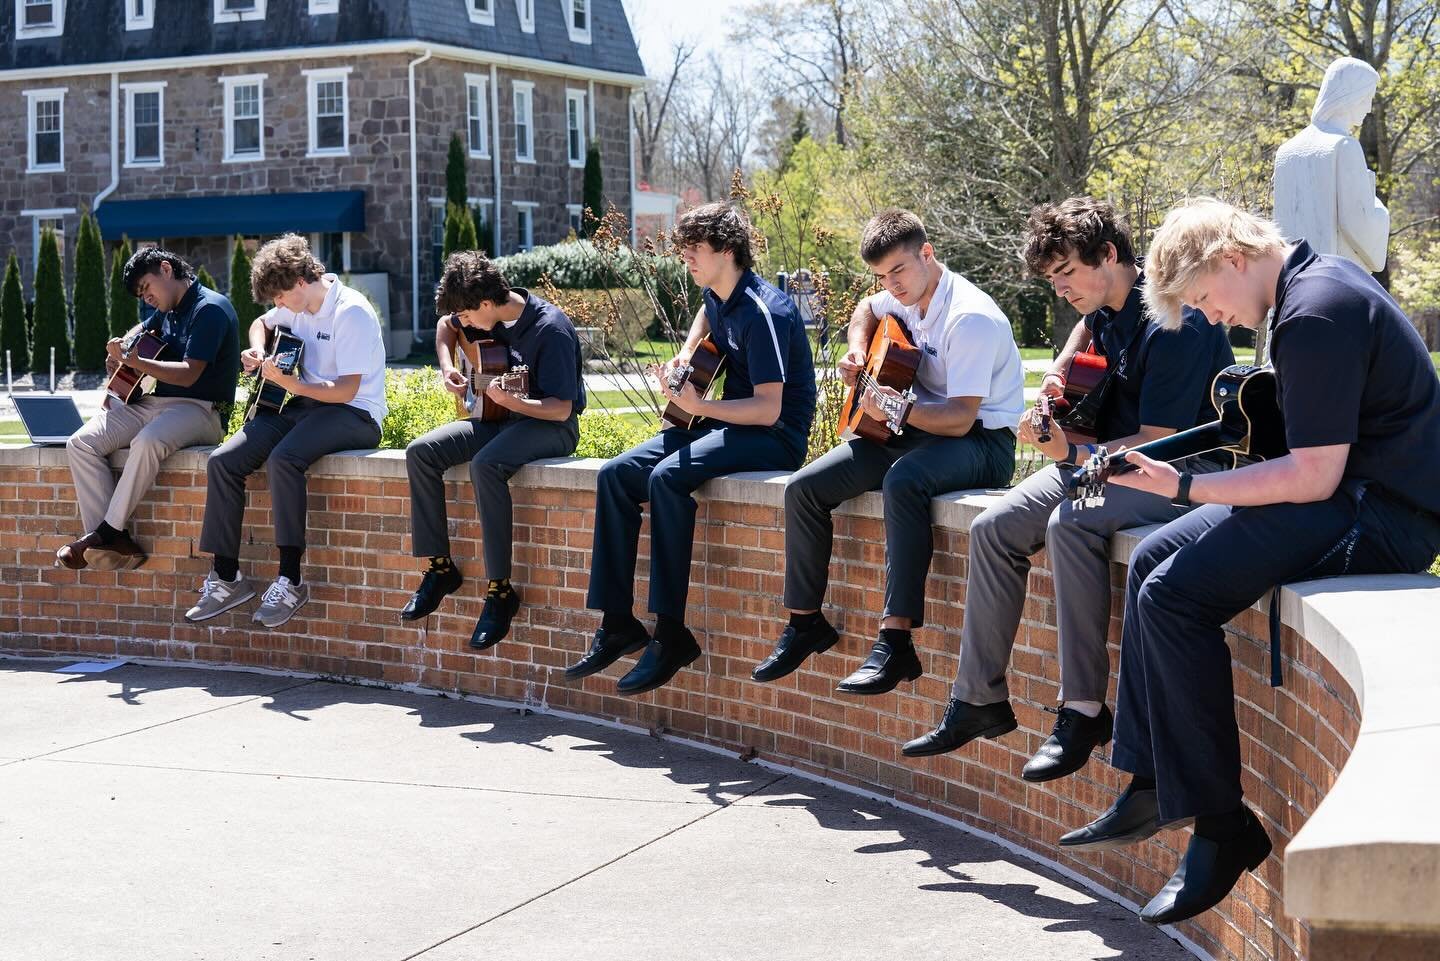 Strumming into spring! 🎸   Mr. Muller&rsquo;s Guitar I class took advantage of the sunny weather with an outdoor session, and even Fr. Murray couldn&rsquo;t resist stopping by to enjoy the music!